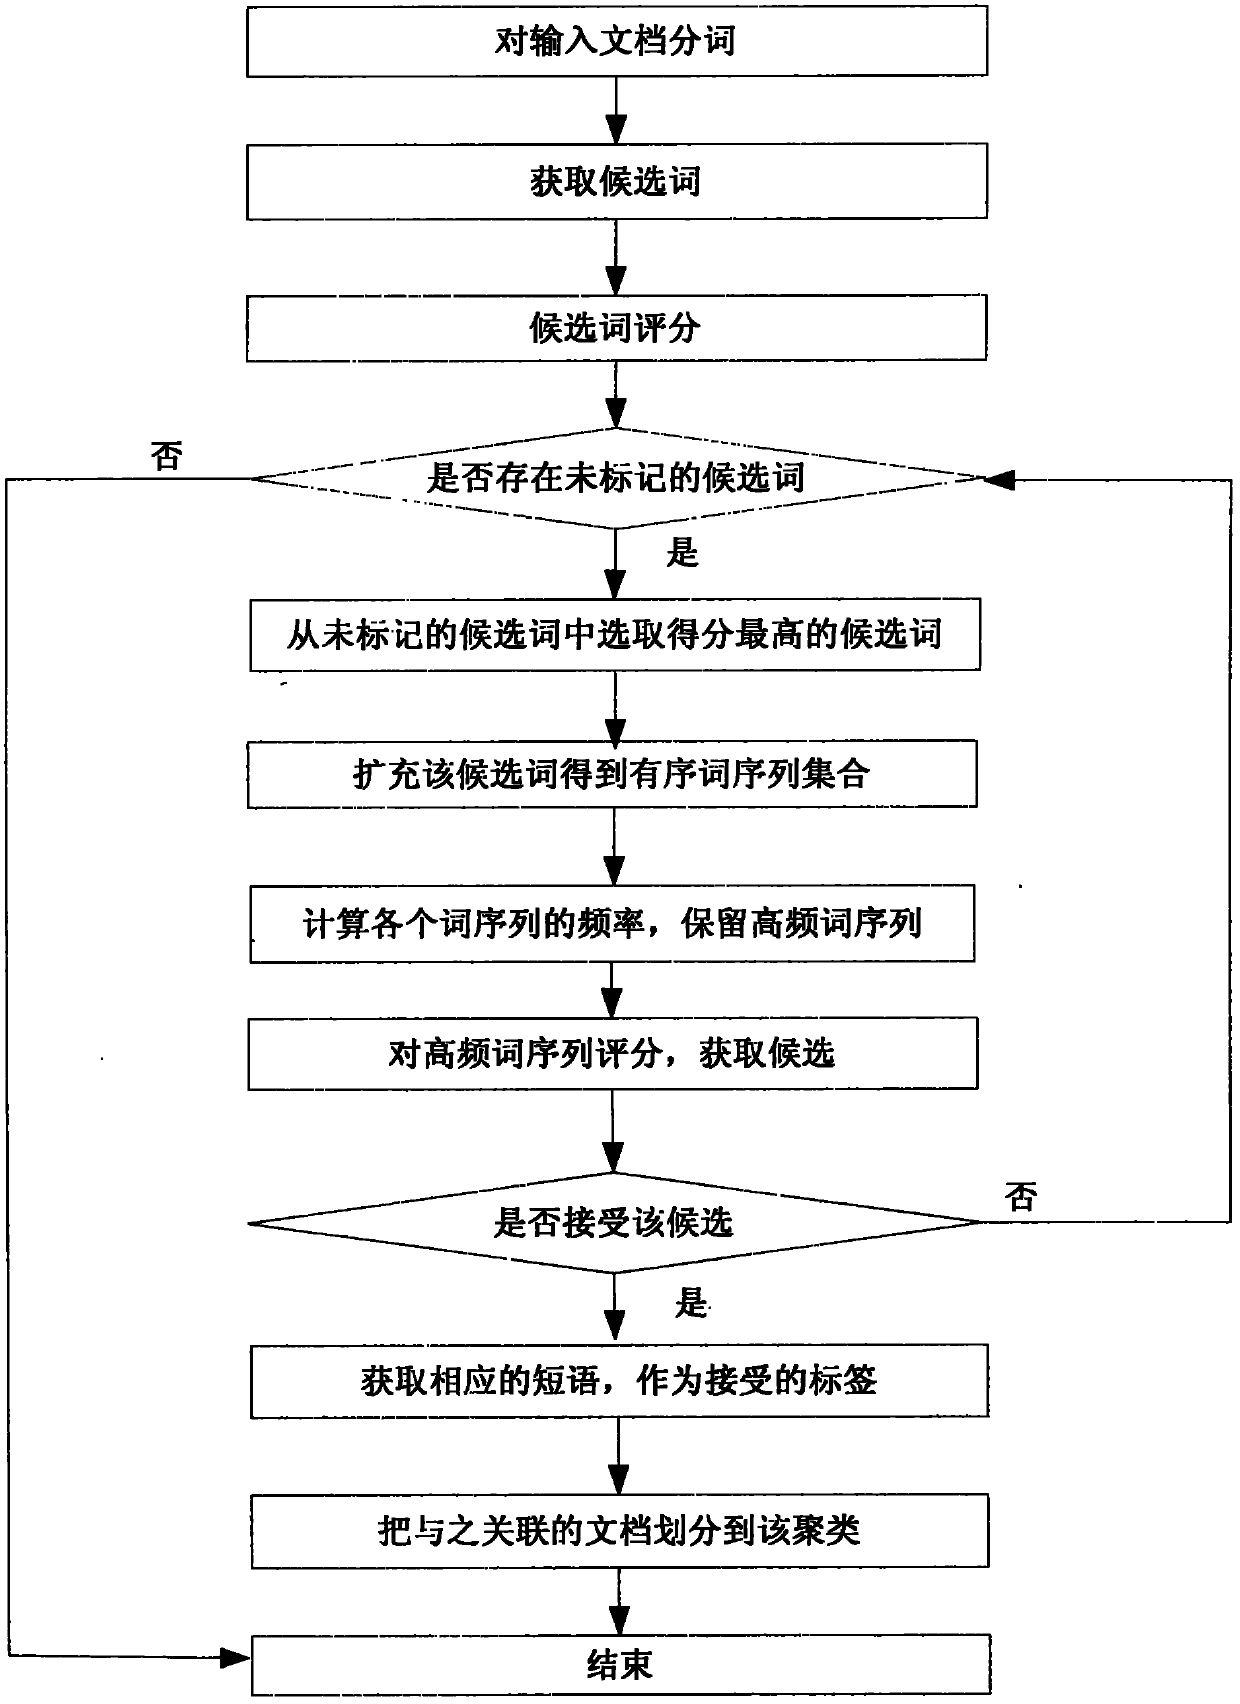 Chinese label extraction method for clustering search results of search engine